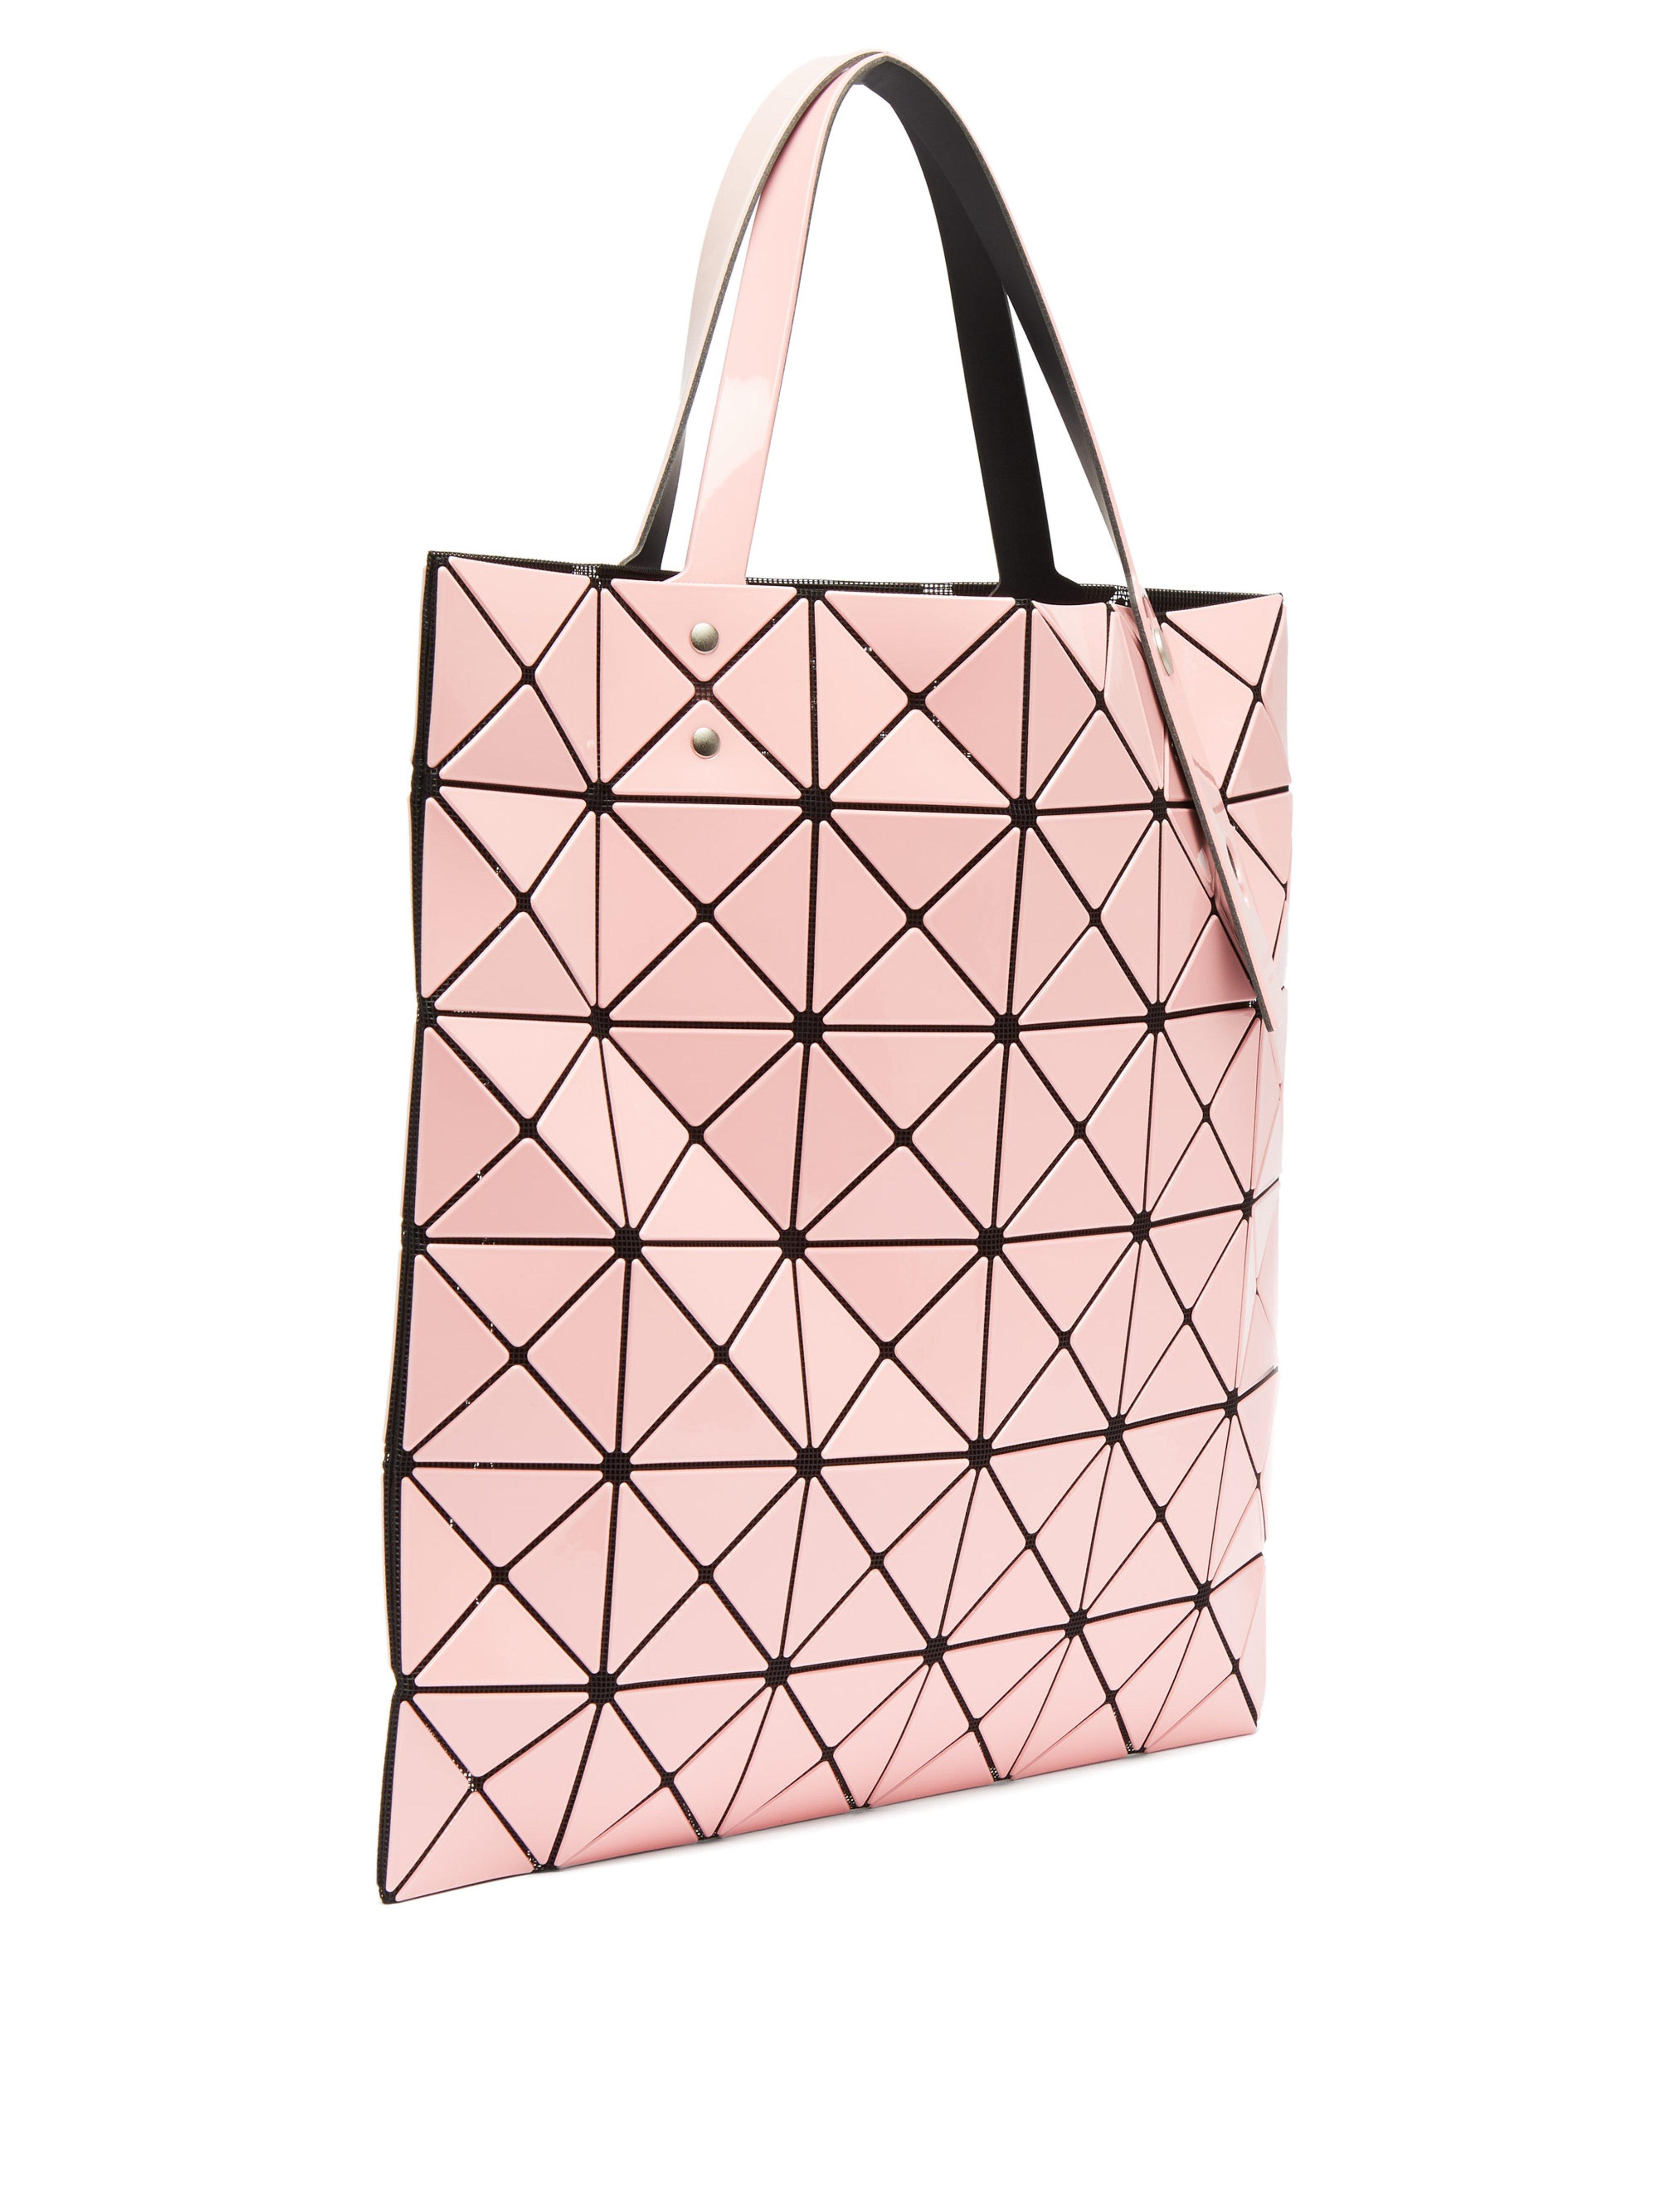 Bao Bao Issey Miyake Lucent Tote in Pink - Lyst